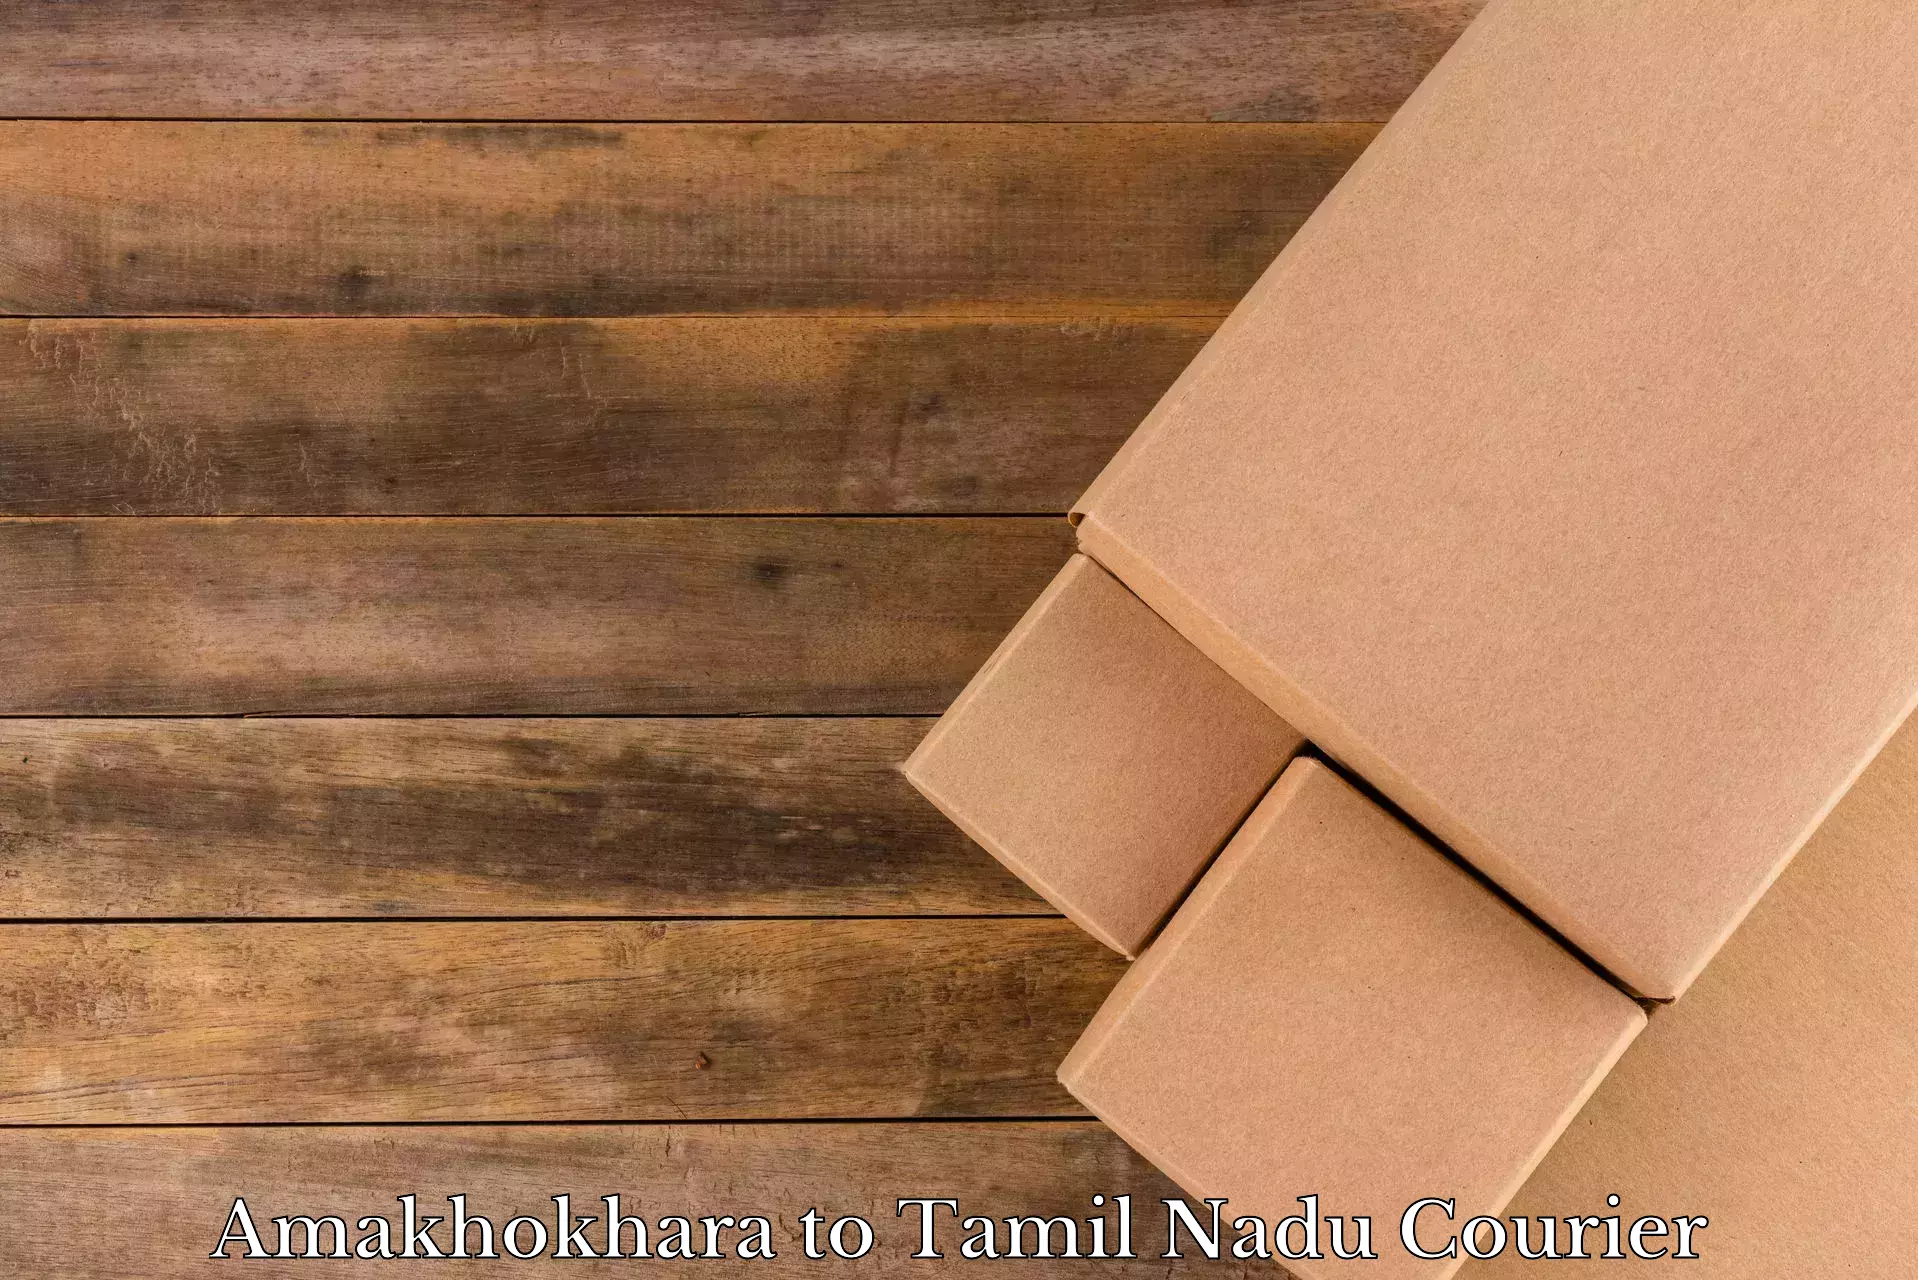 Advanced household moving services Amakhokhara to Meenakshi Academy of Higher Education and Research Chennai